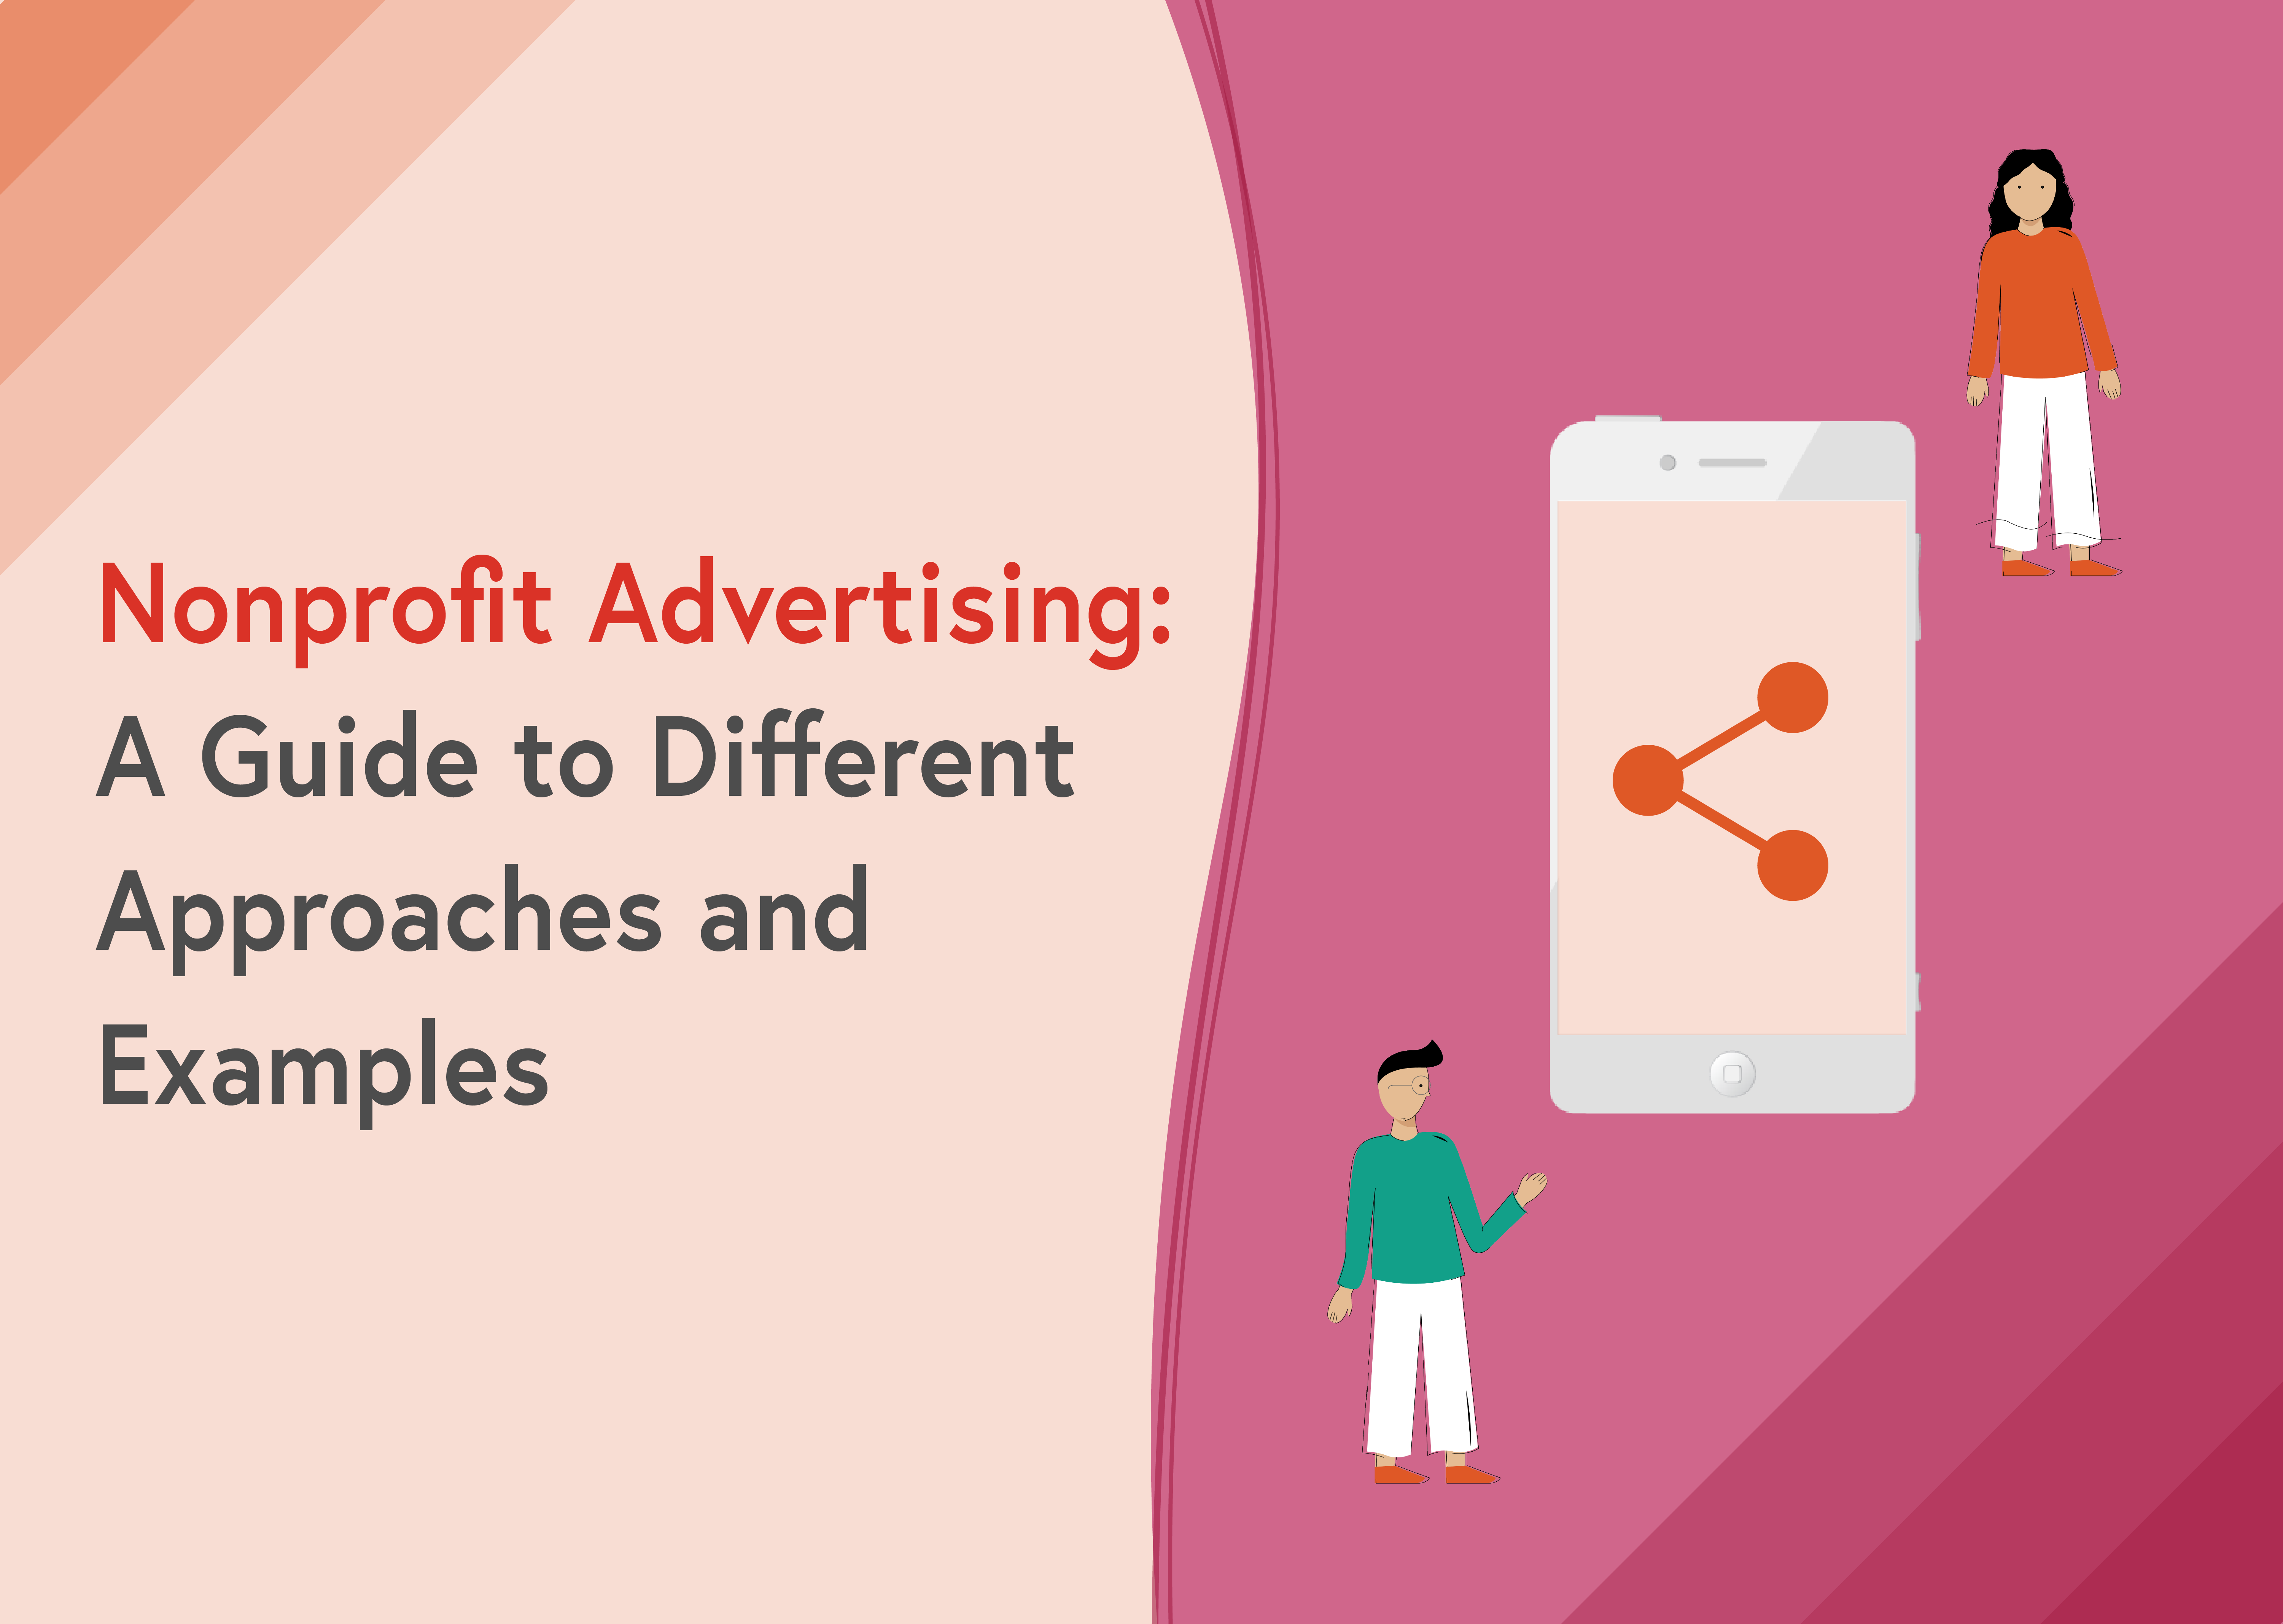 Nonprofit Advertising: A Guide to Different Approaches and Examples